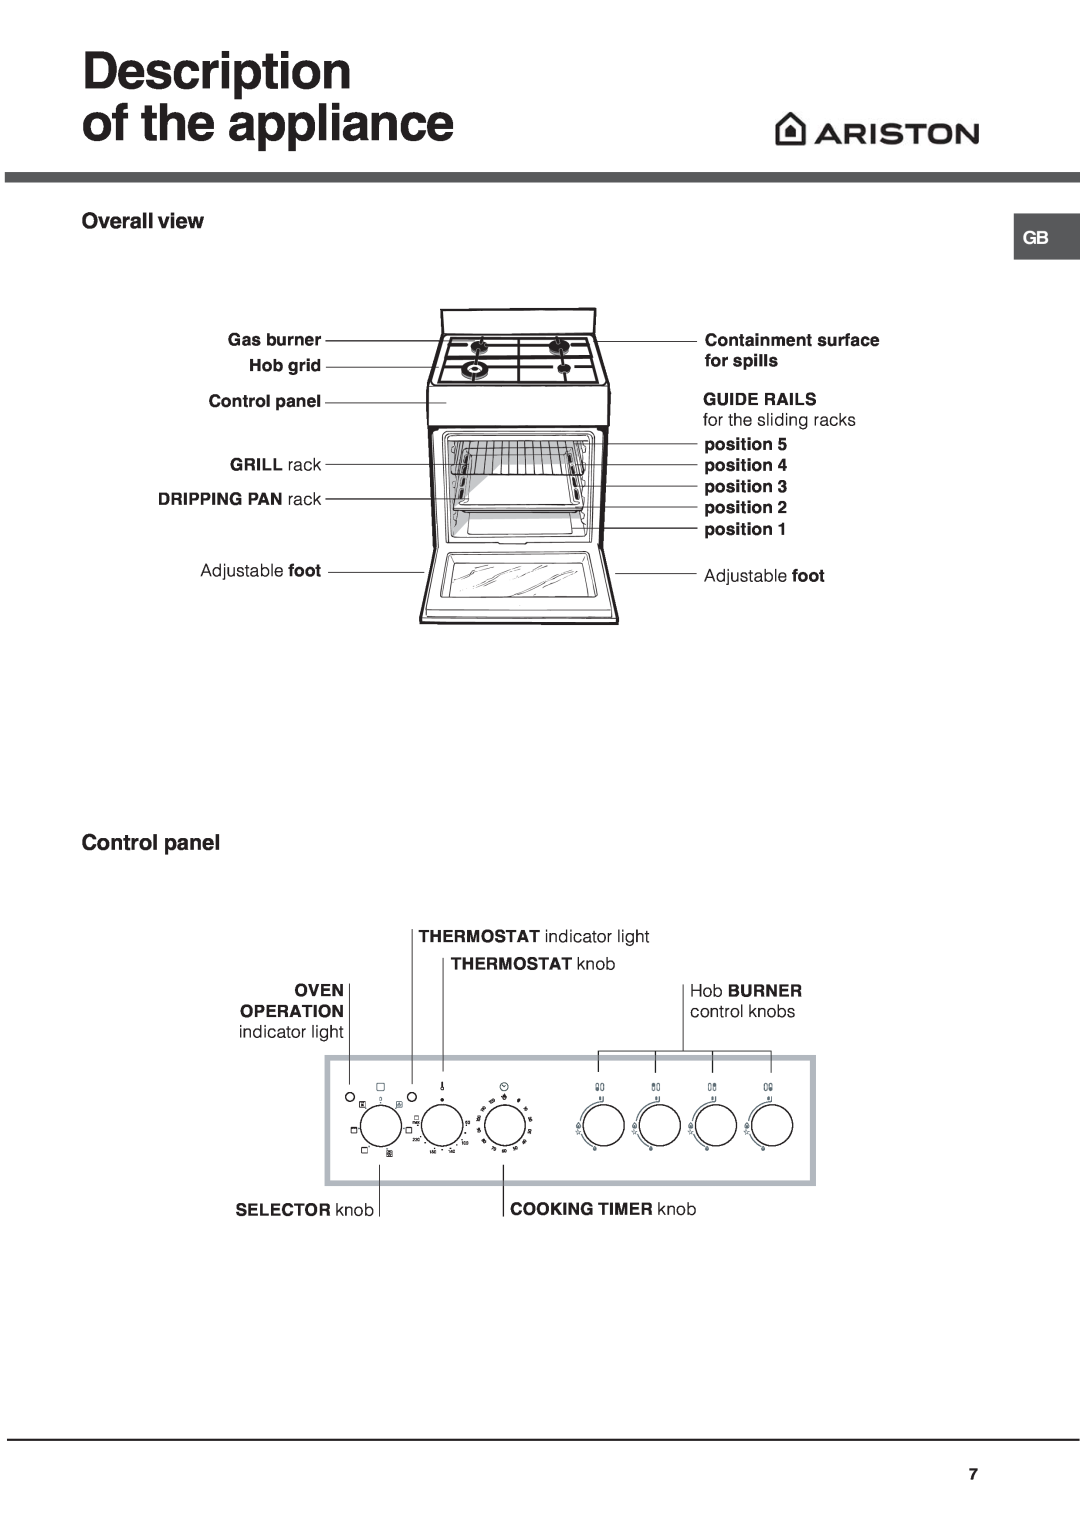 Ariston CX65SM2XAUS Description of the appliance, Overall view, Control panel, DRIPPING PAN rack, SELECTOR knob 